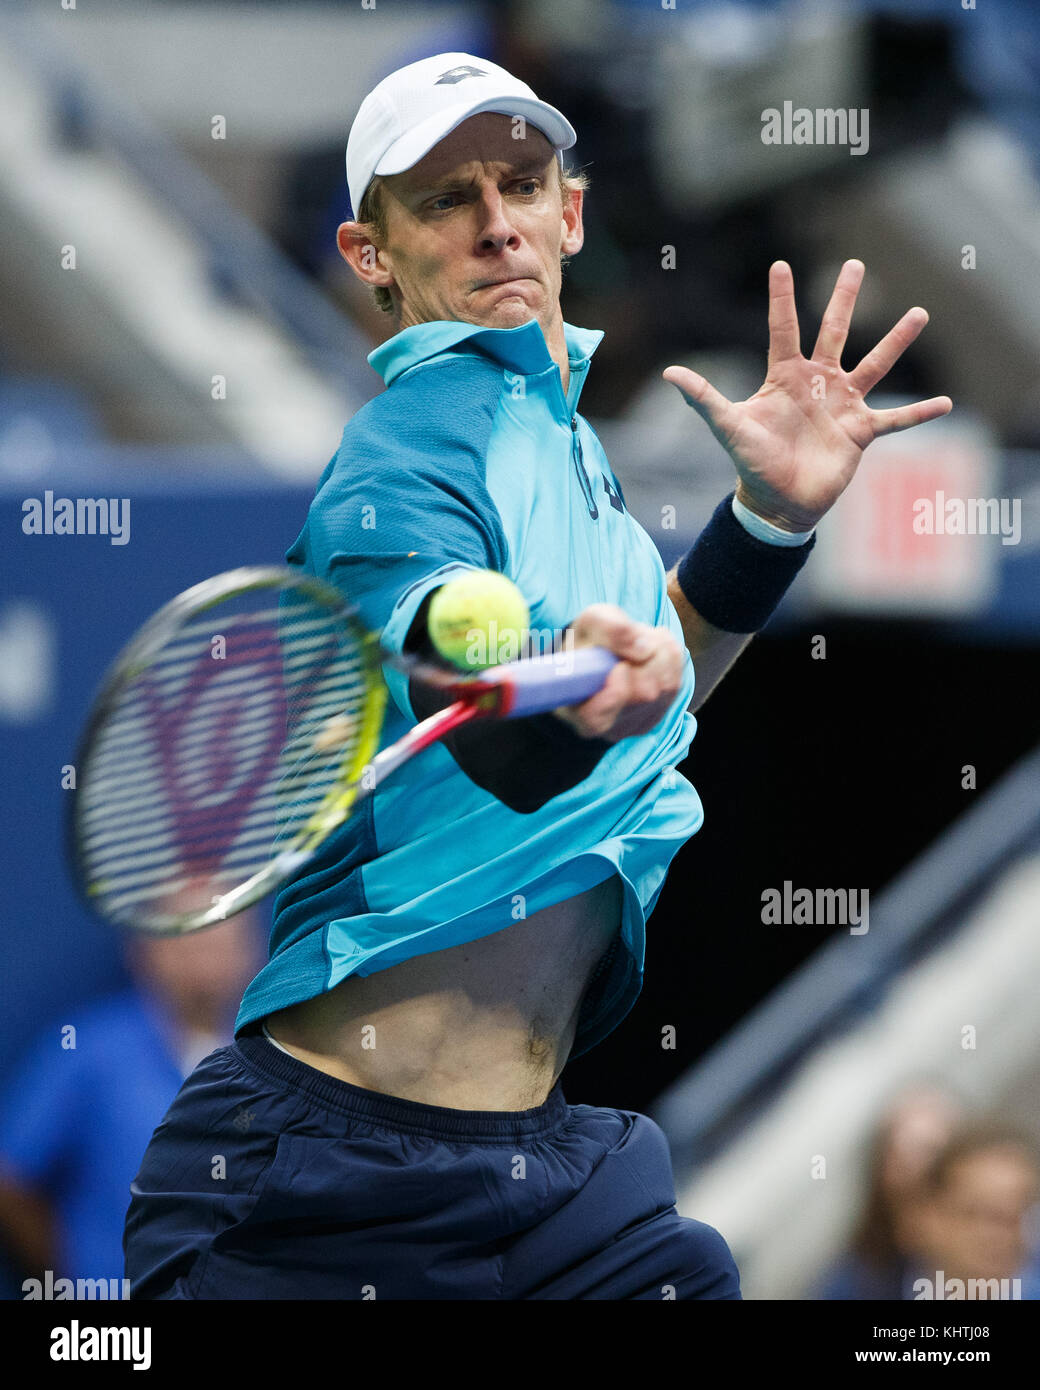 South African  tennis player KEVIN ANDERSON (RSA) plays forehand shot during men's singles match at US Open 2017 Tennis Championship, New York City, Stock Photo